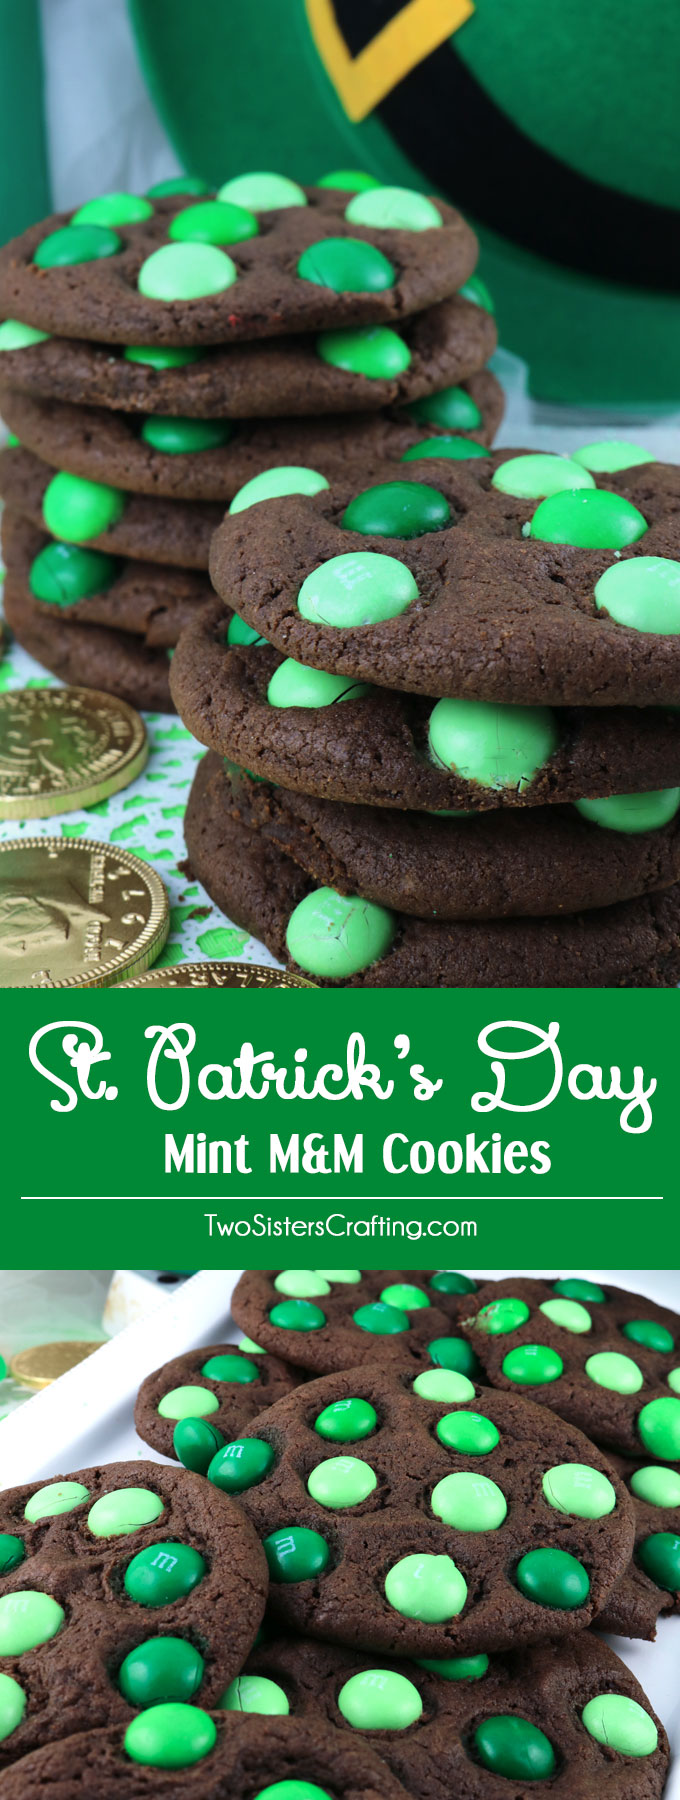 Our yummy and minty St. Patrick’s Day Mint M&M Cookies are a great St. Patrick’s Day treat for the family